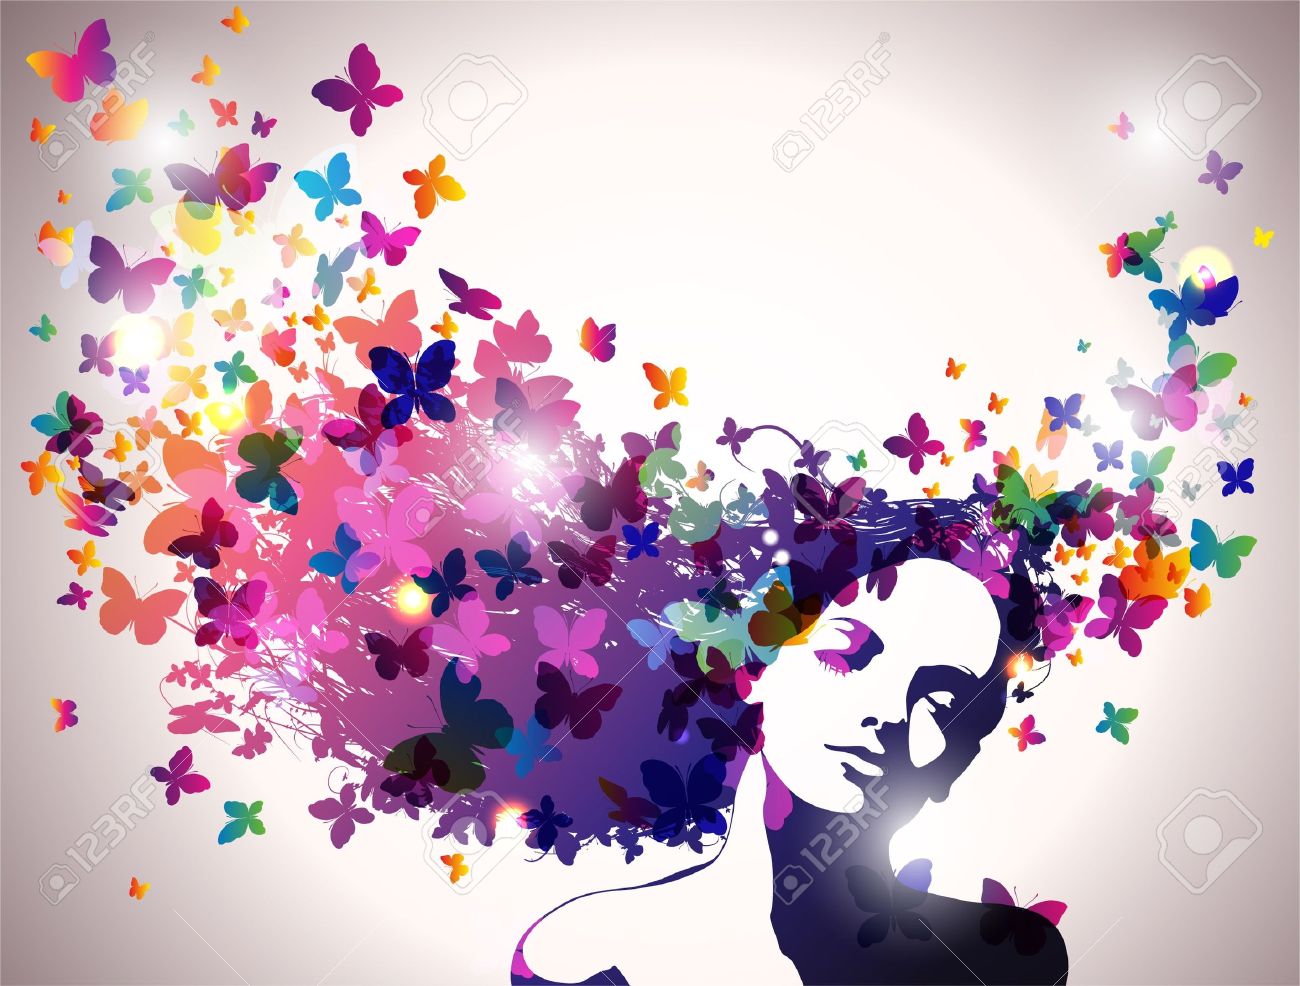 [Jeu] Association d'images - Page 9 10933977-Woman-with-butterflies-in-hair--Stock-Vector-fantasy